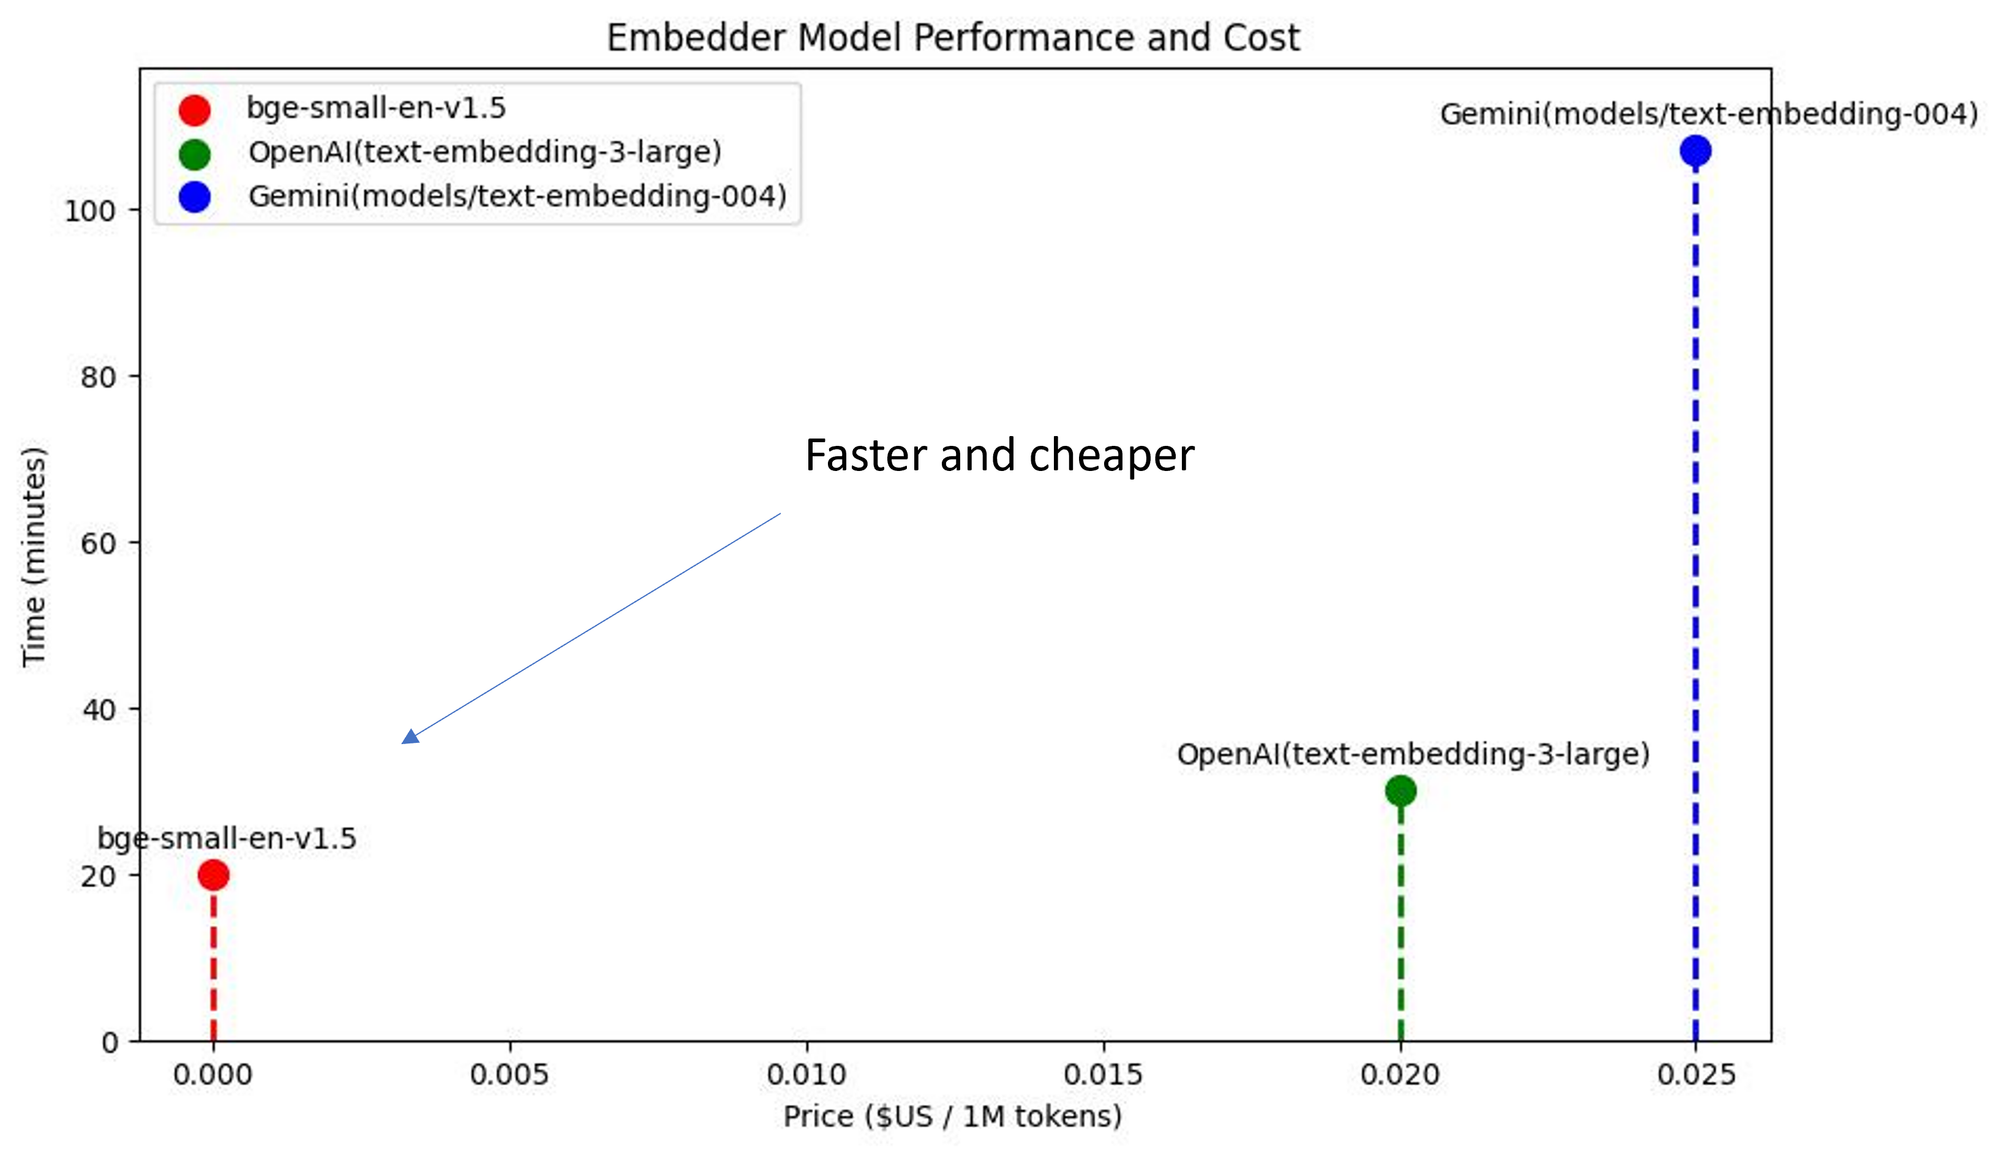 embedder model performance and cost